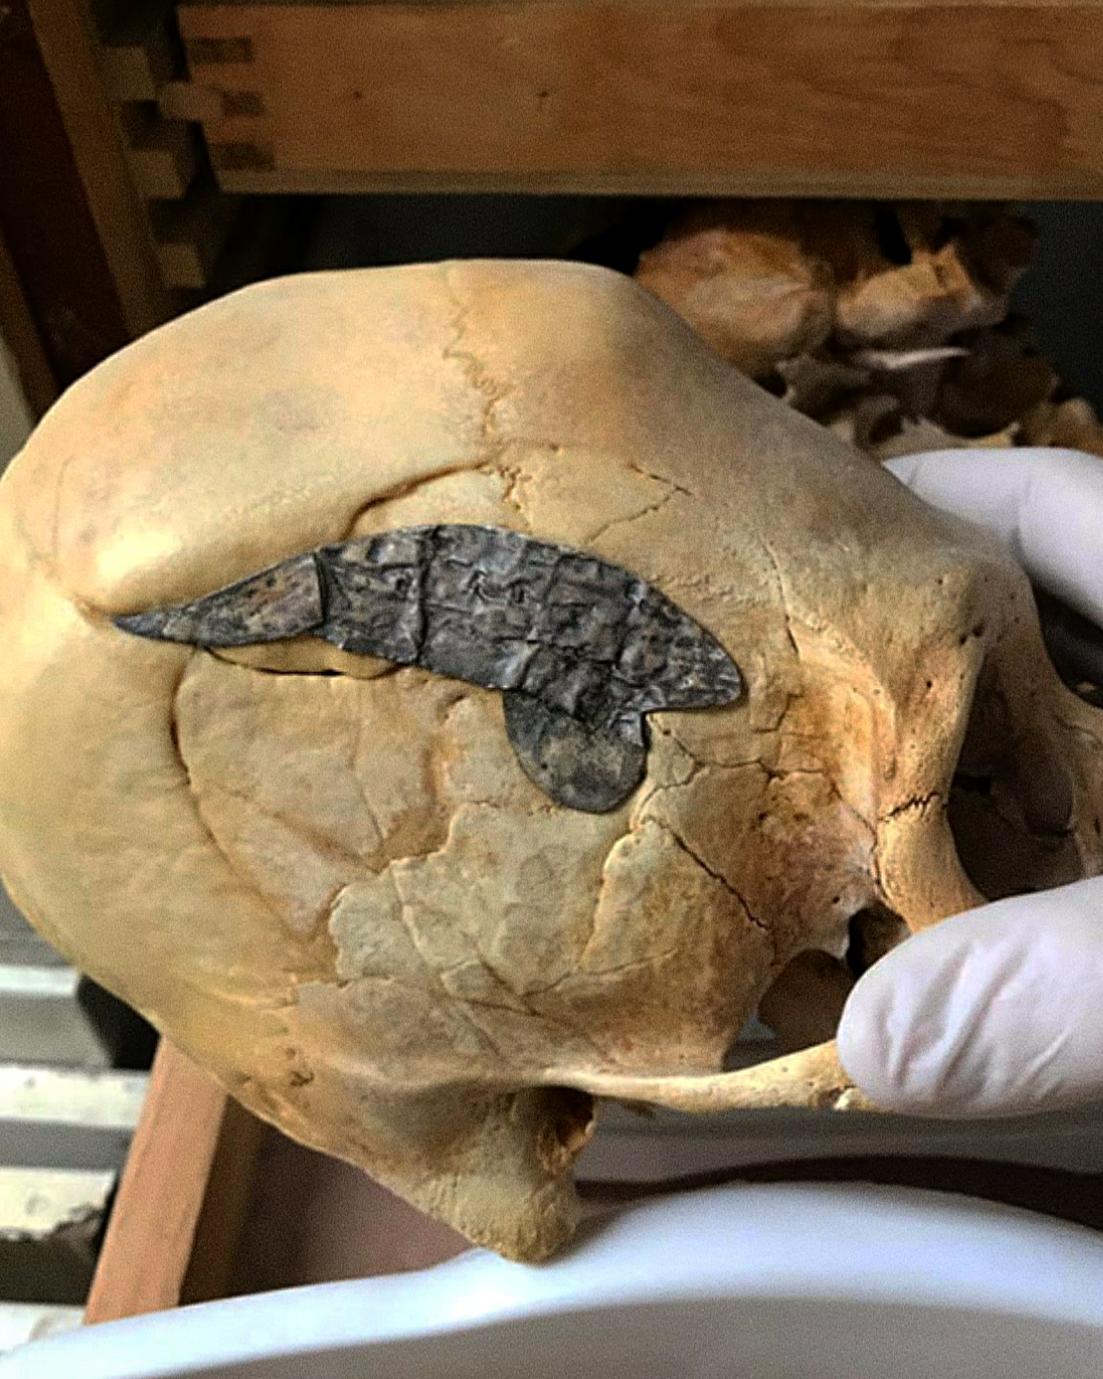 Peruvian elongated skull which underwent skull surgery and had metal surgically implanted to bind the bones after being wounded in battle about 2,000 years ago